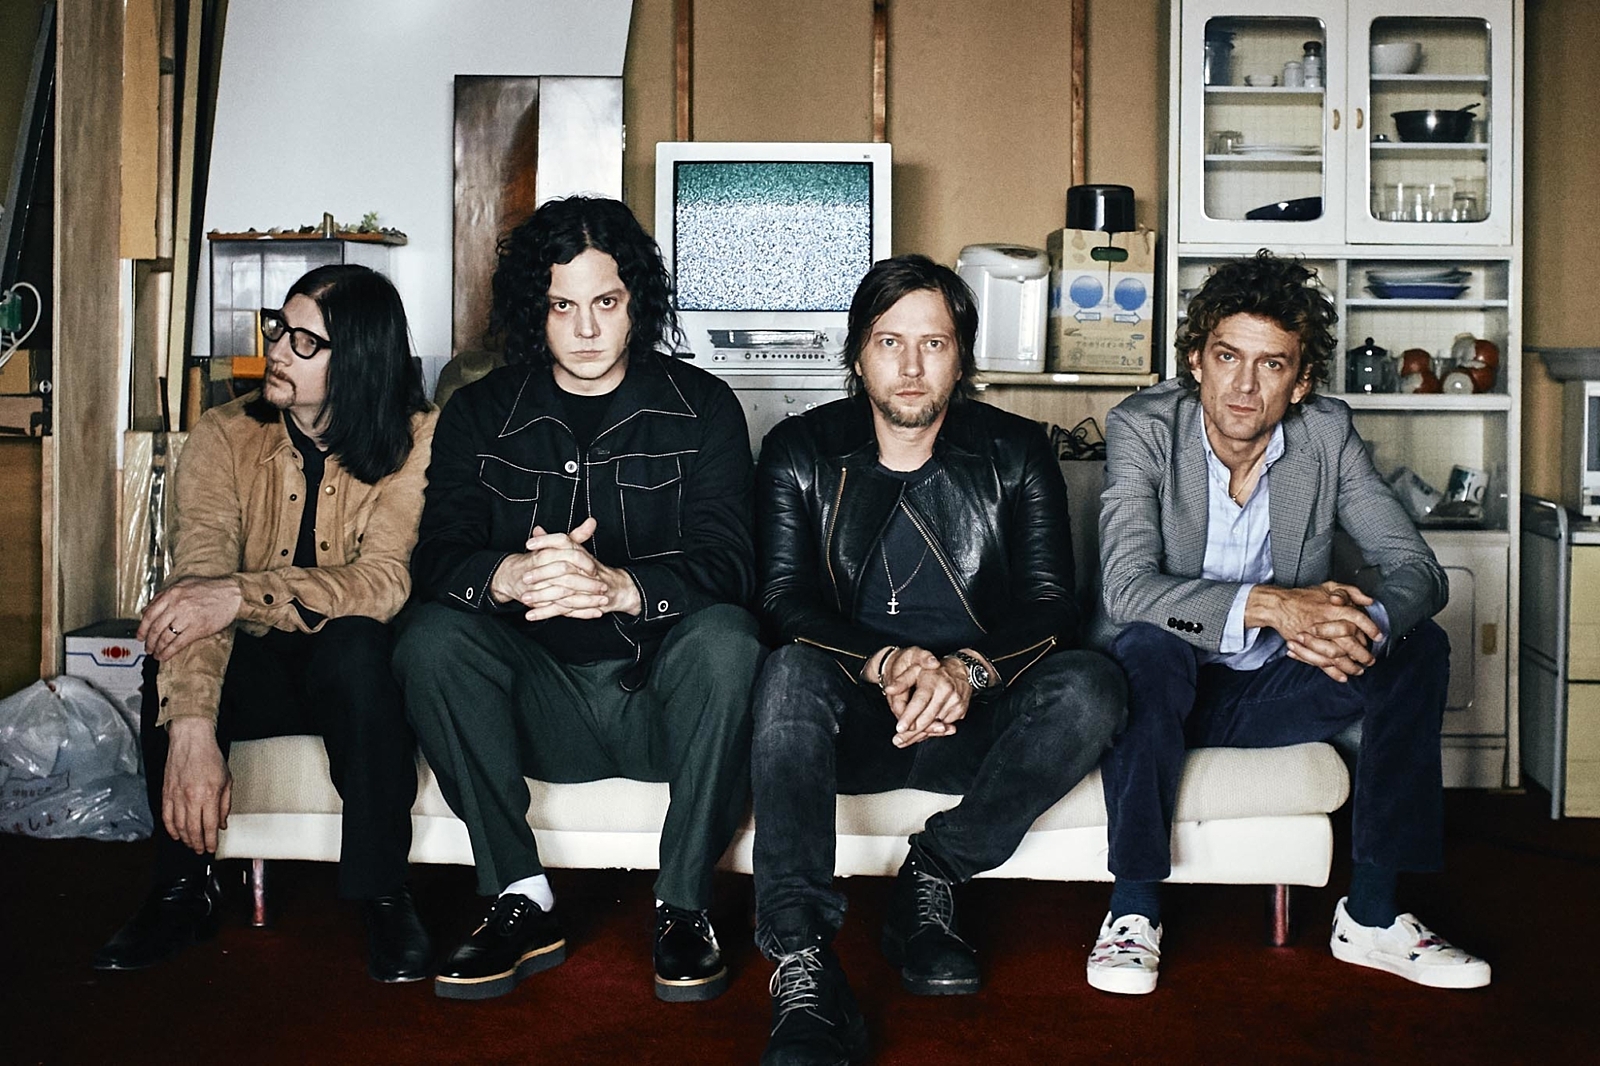 Get an insight into the return of The Raconteurs with TIDAL's In Conversation series